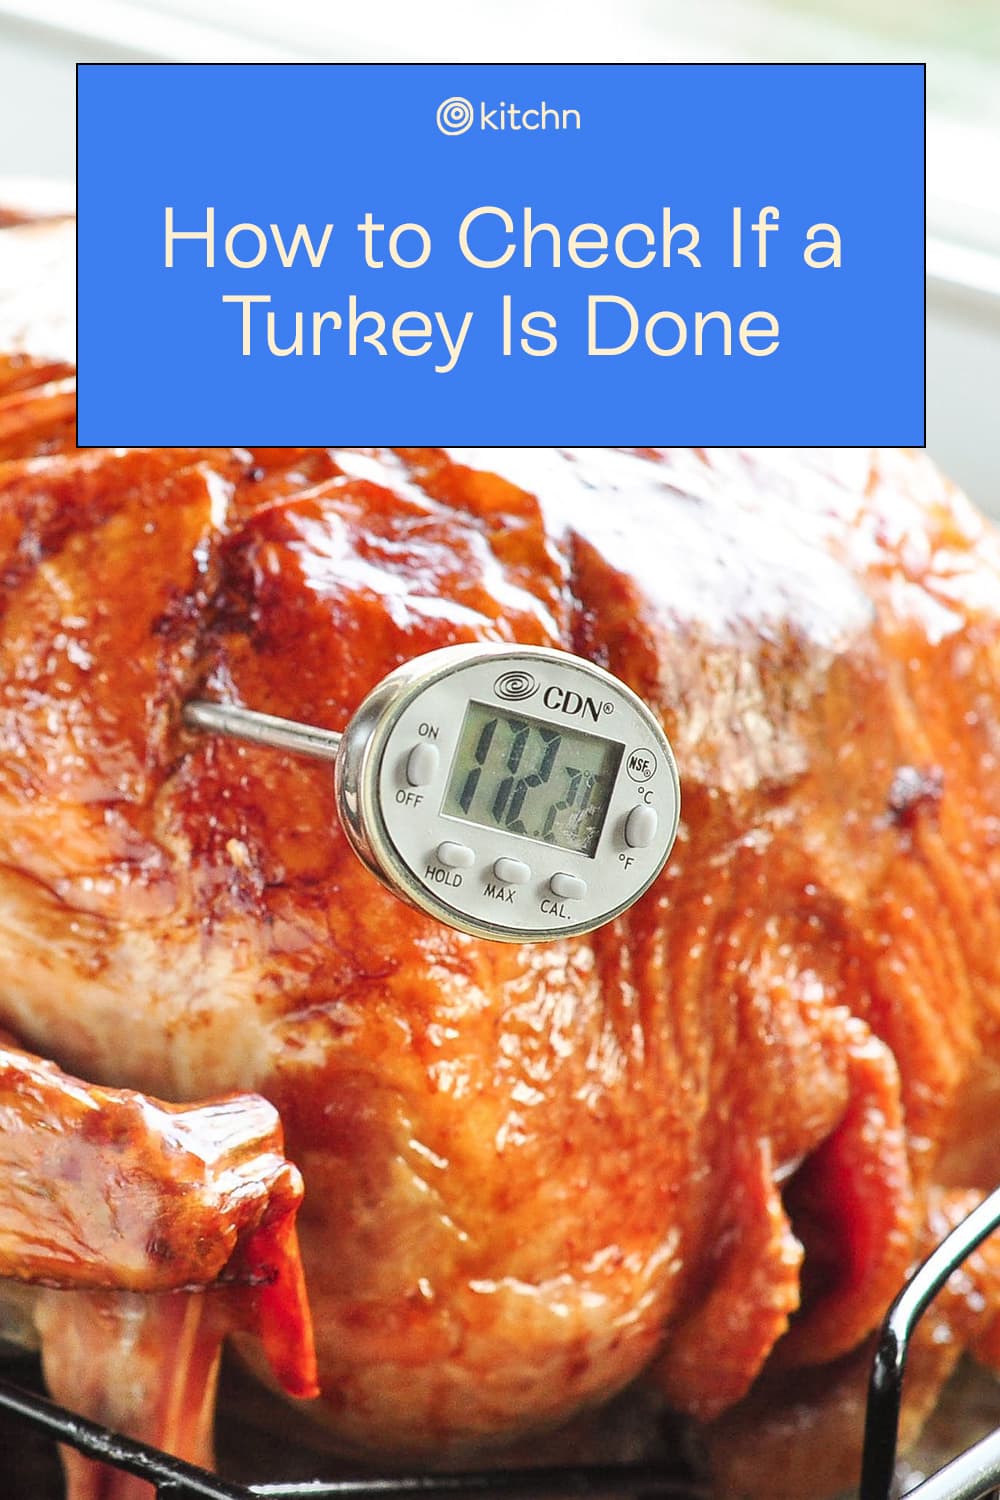 How to Tell if a Turkey Is Done Without a Thermometer